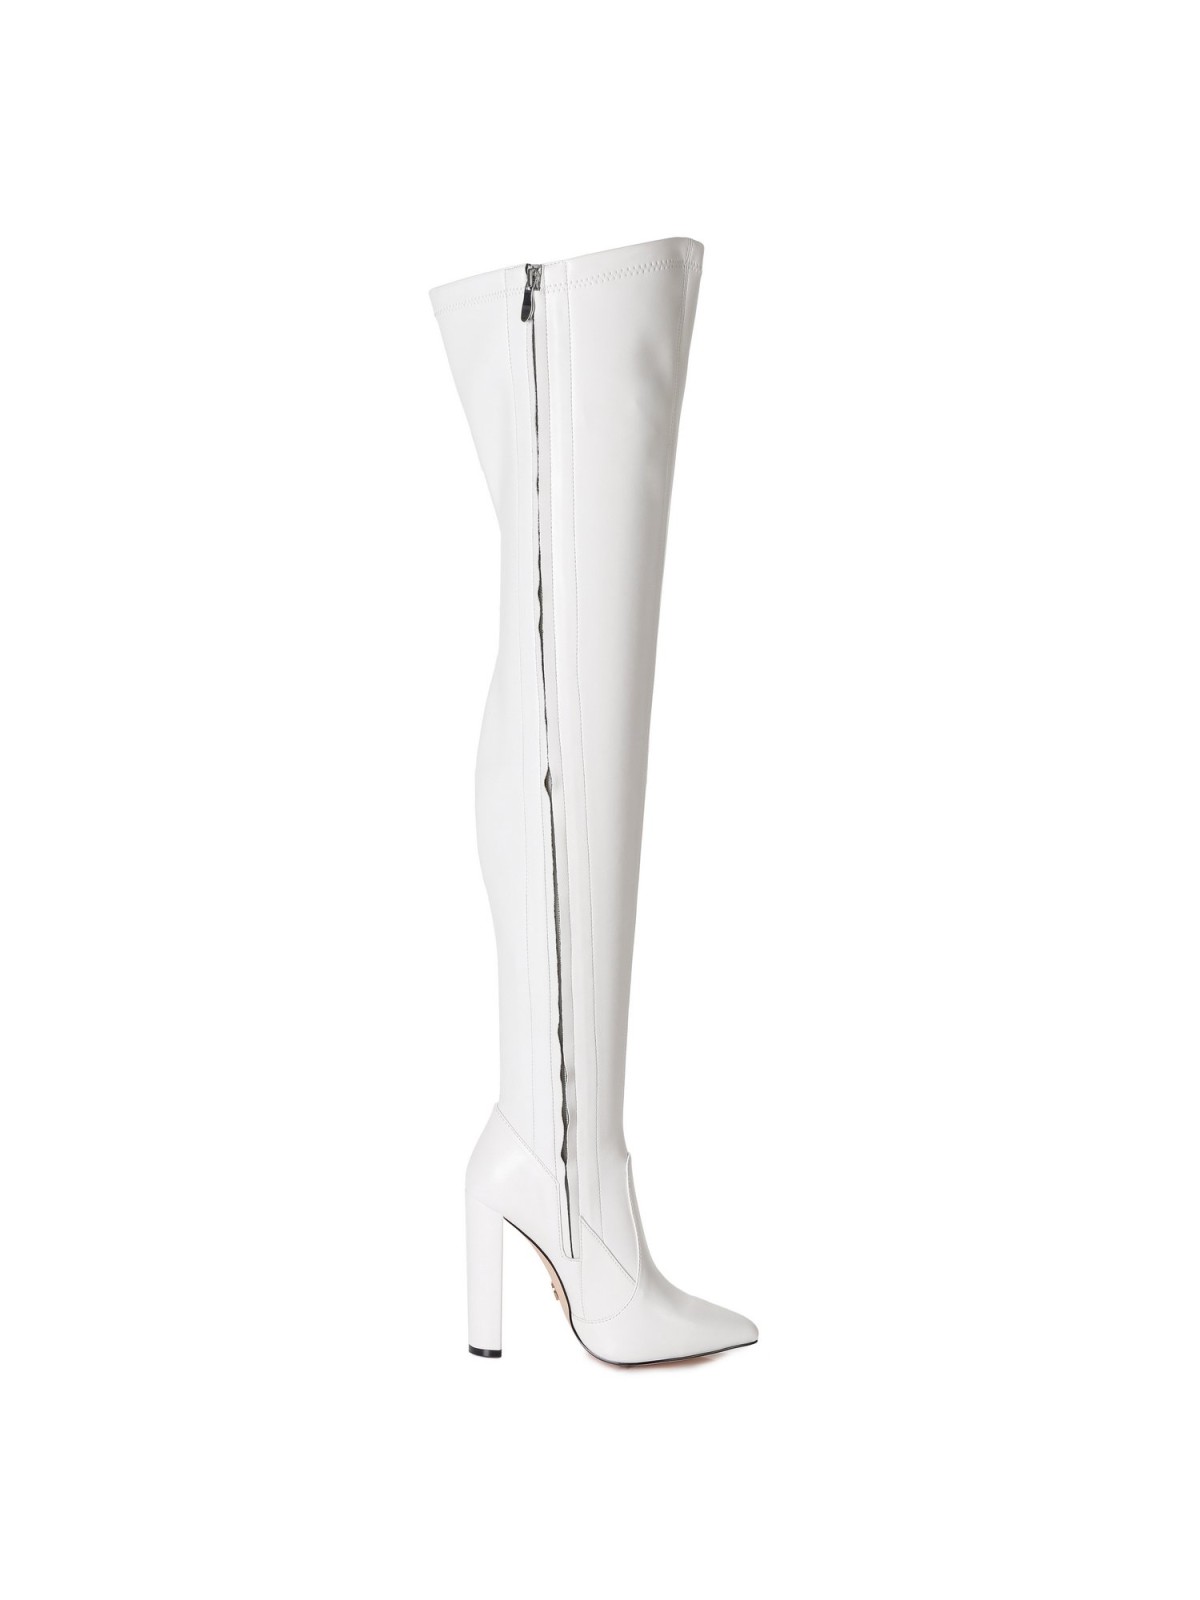 Giaro TRINKET white over-the-knee boots with block heels